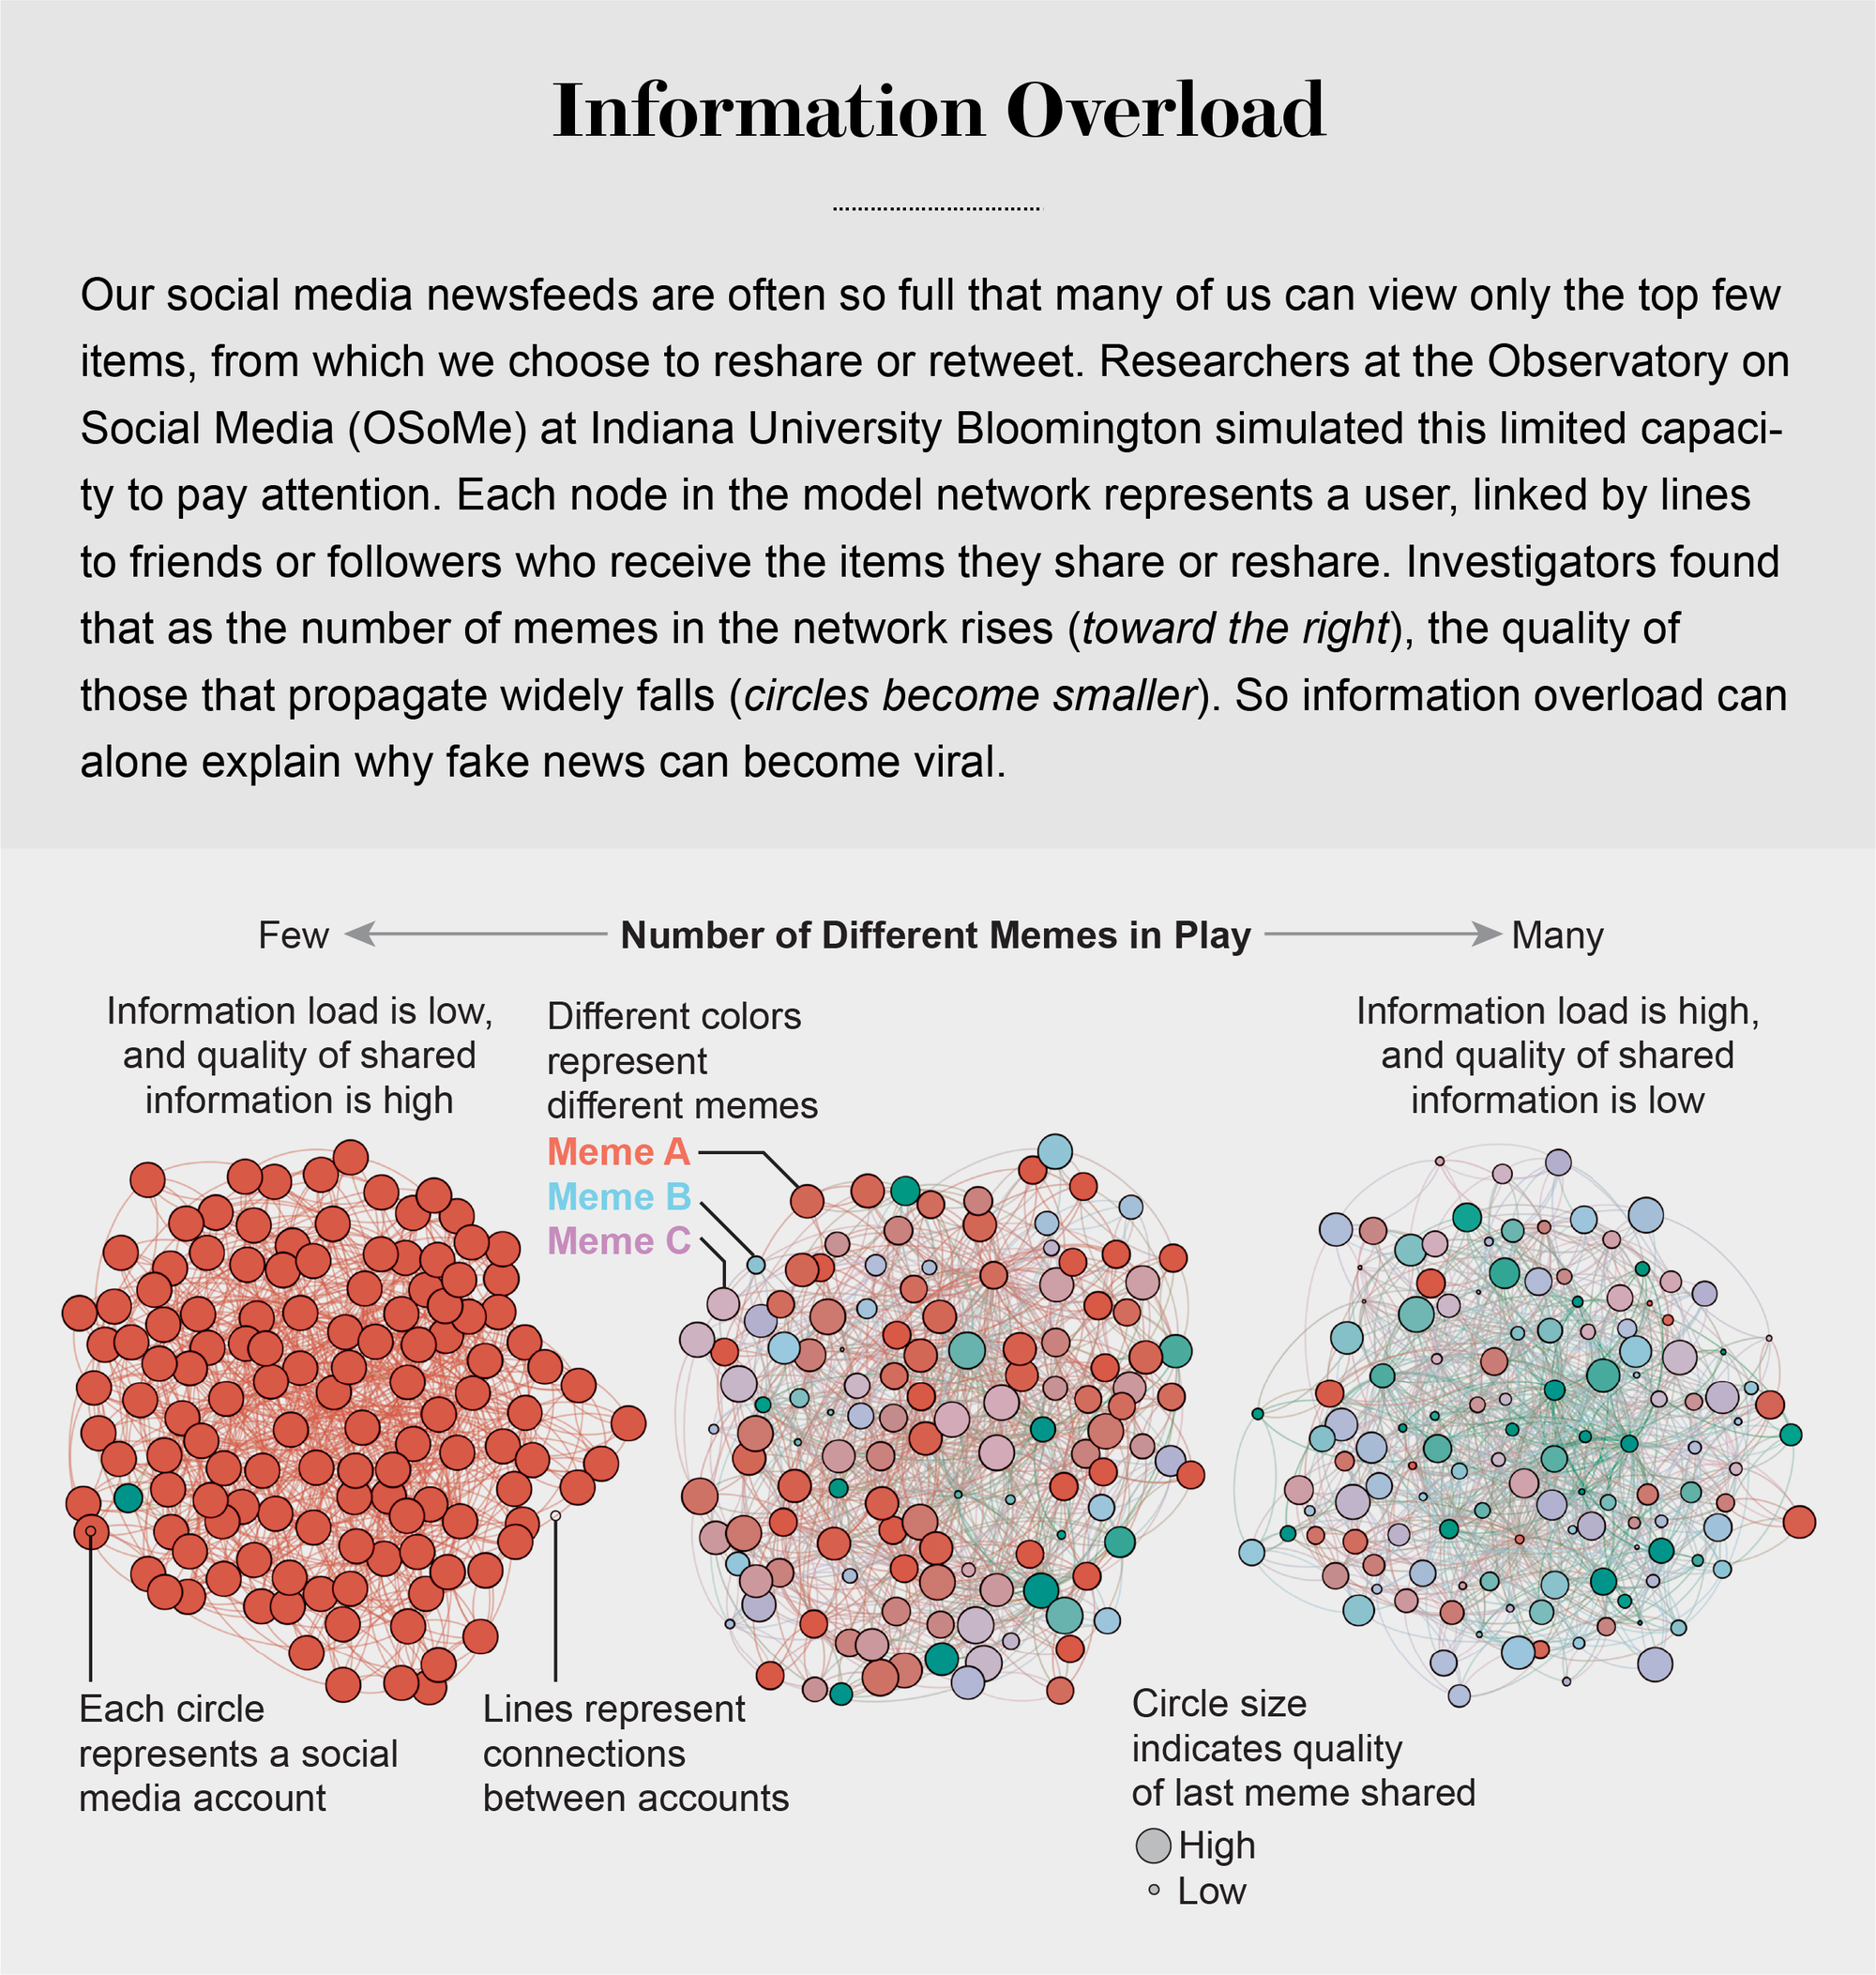 Information Overload Helps Fake News Spread, and Social Media Knows It